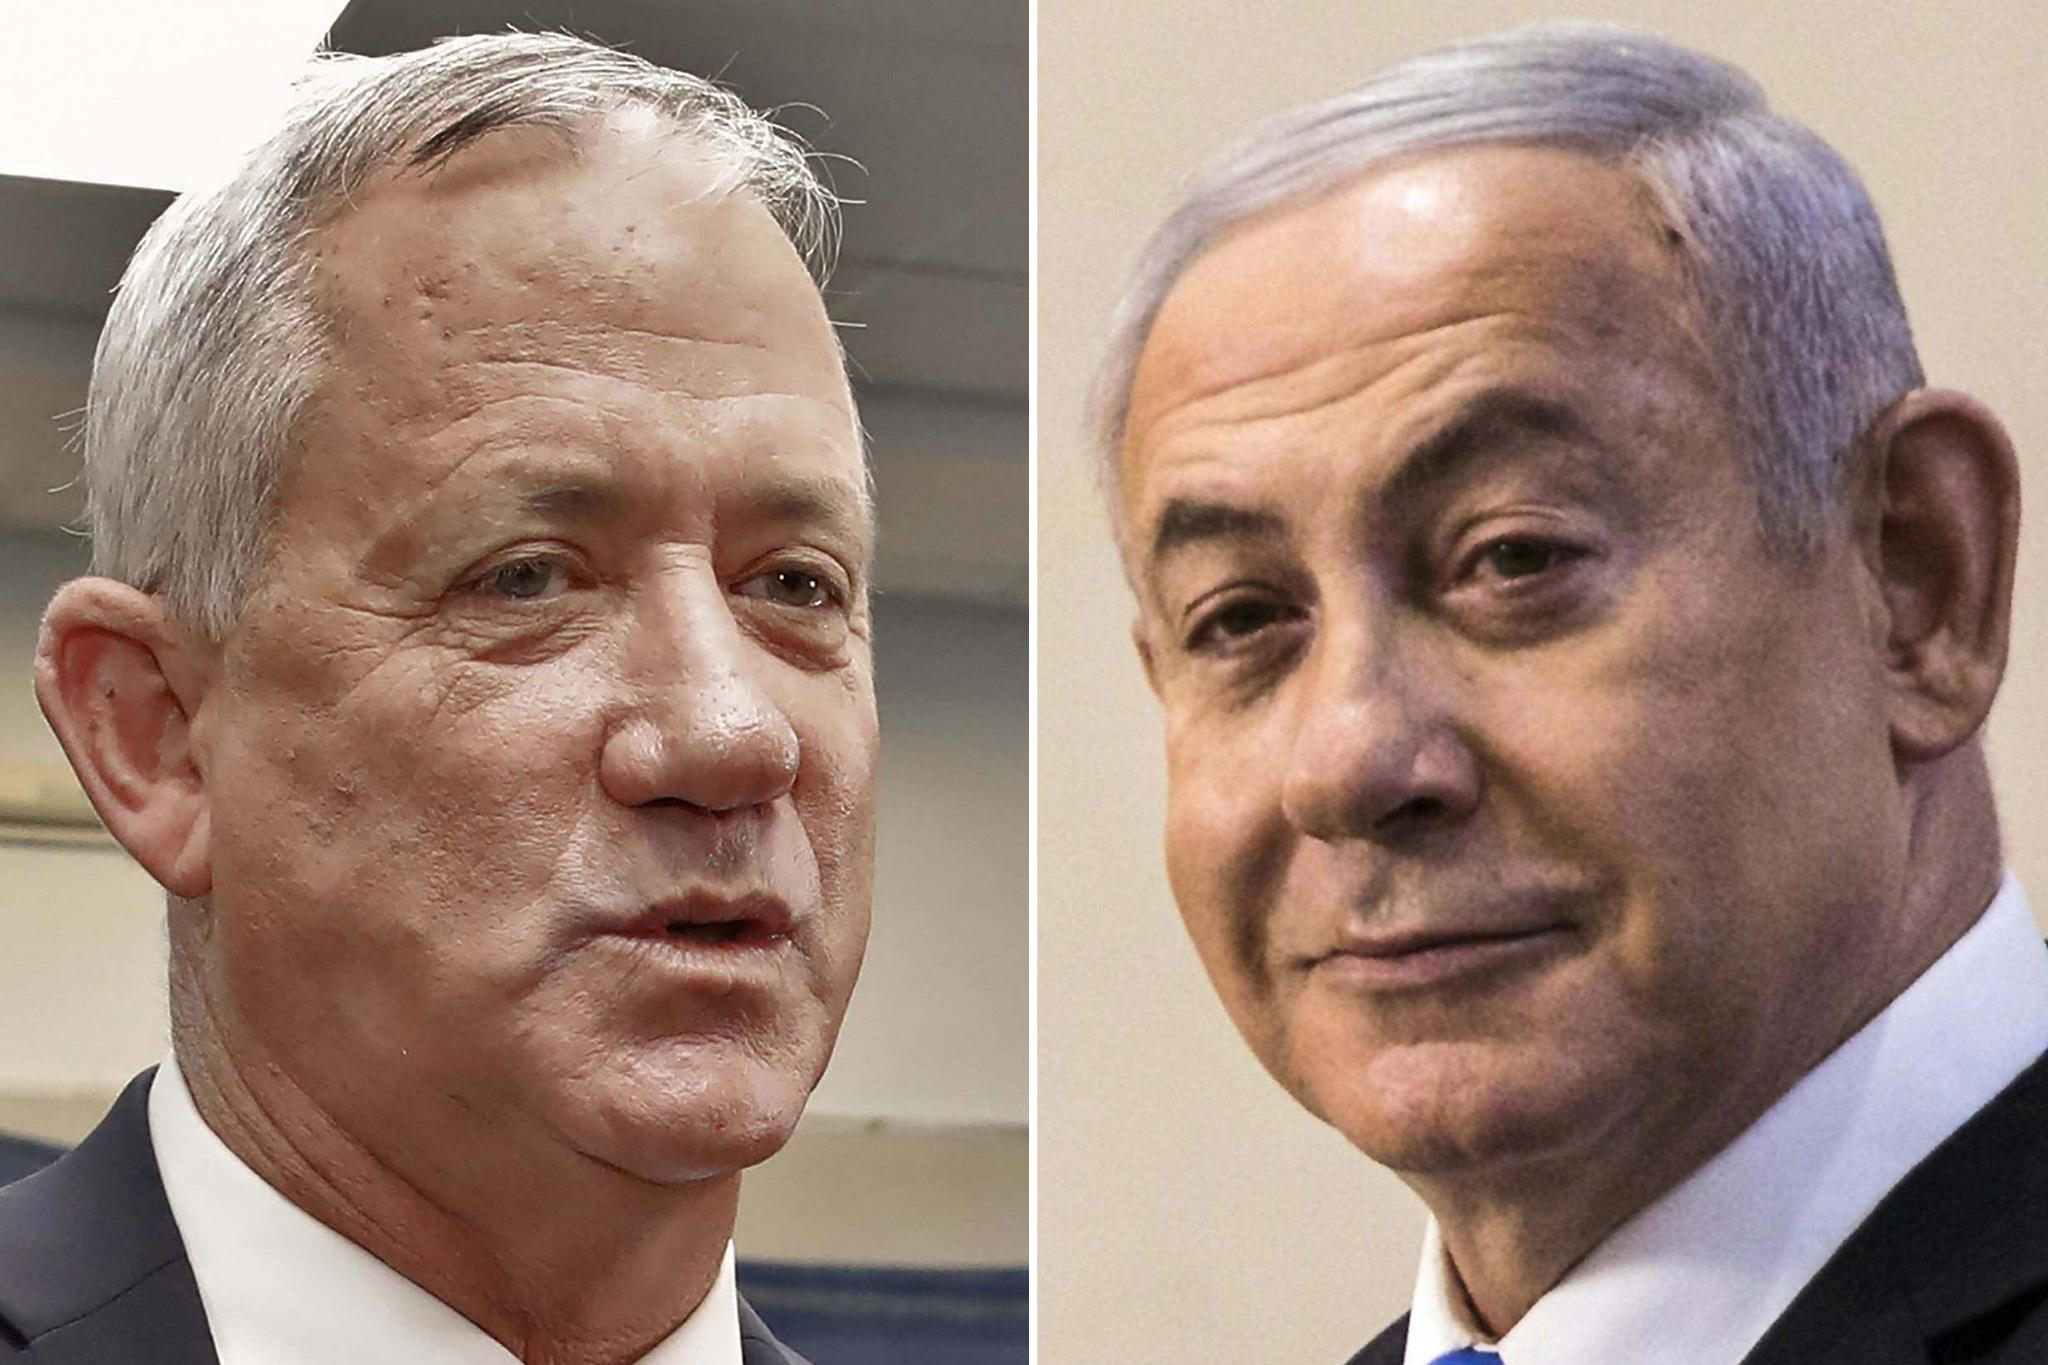 Netanyahu has been in power for over a decade, but his second failed attempt to form a government in six months could pave the way for chief rival Benny Gantz